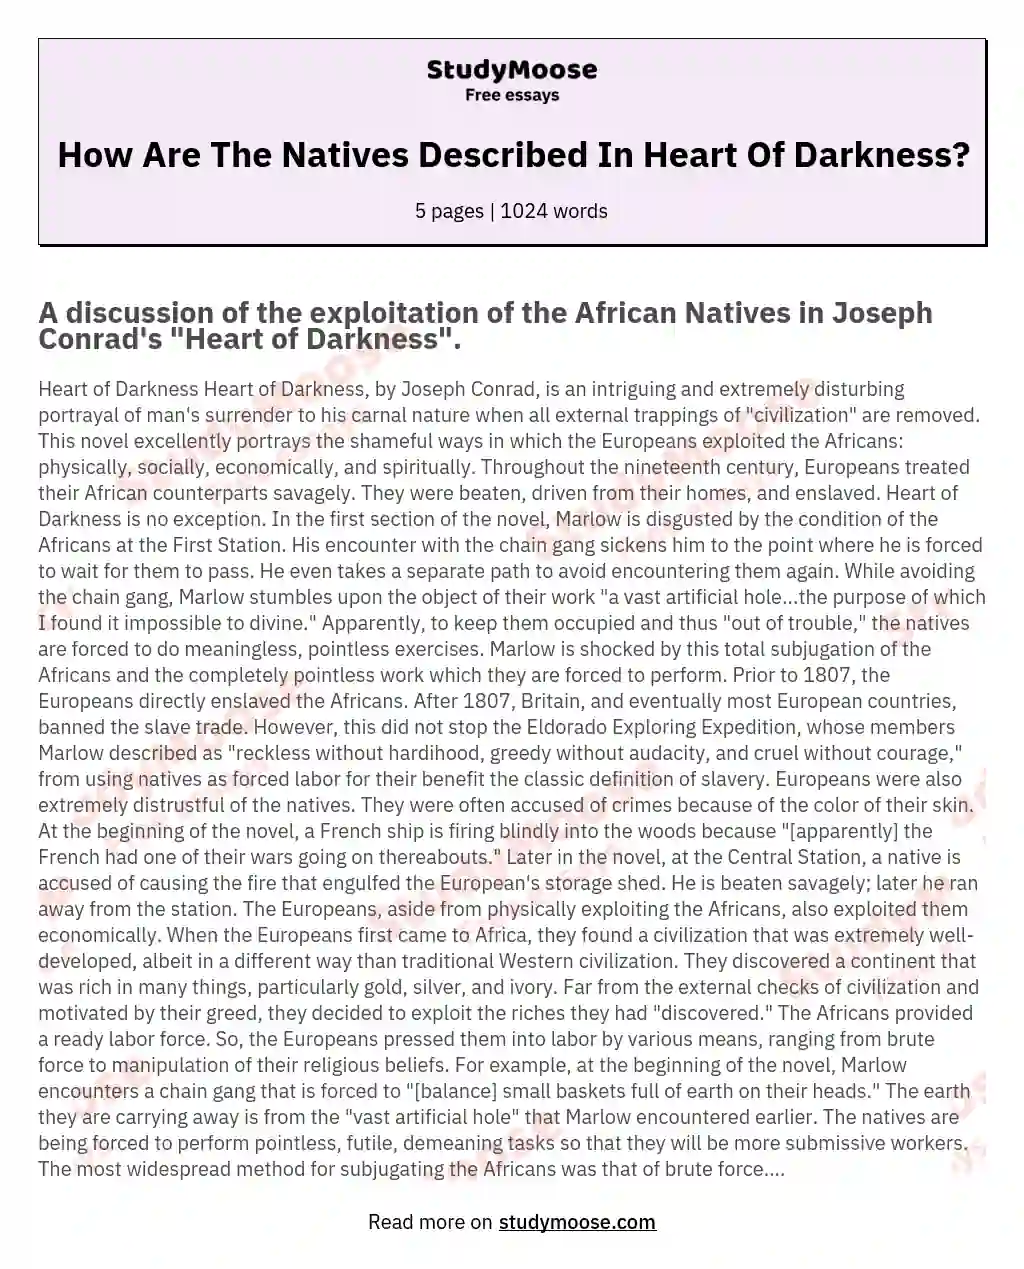 How Are The Natives Described In Heart Of Darkness? essay